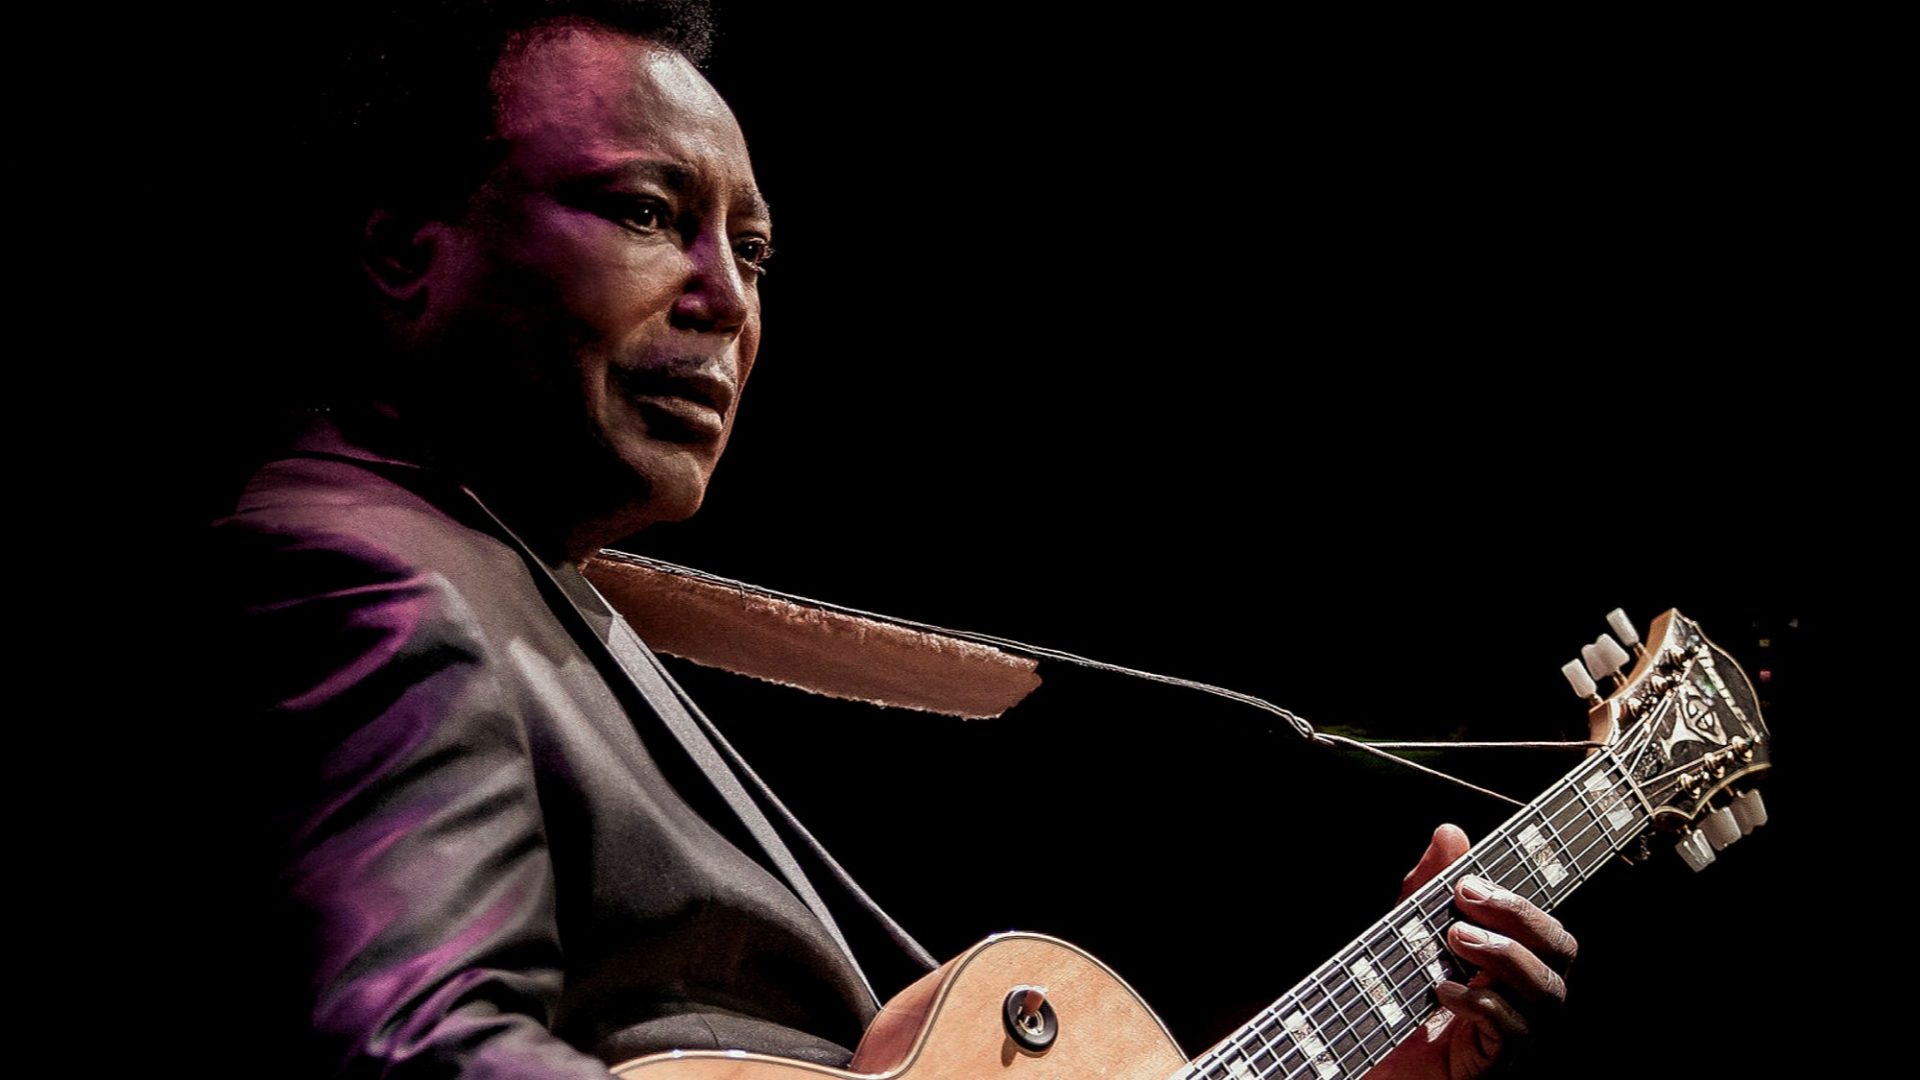 George-Benson-Perfomance
Photos by : https://www.ft.com/content/489271a8-be72-4d54-b33c-5e99a2a3ebff